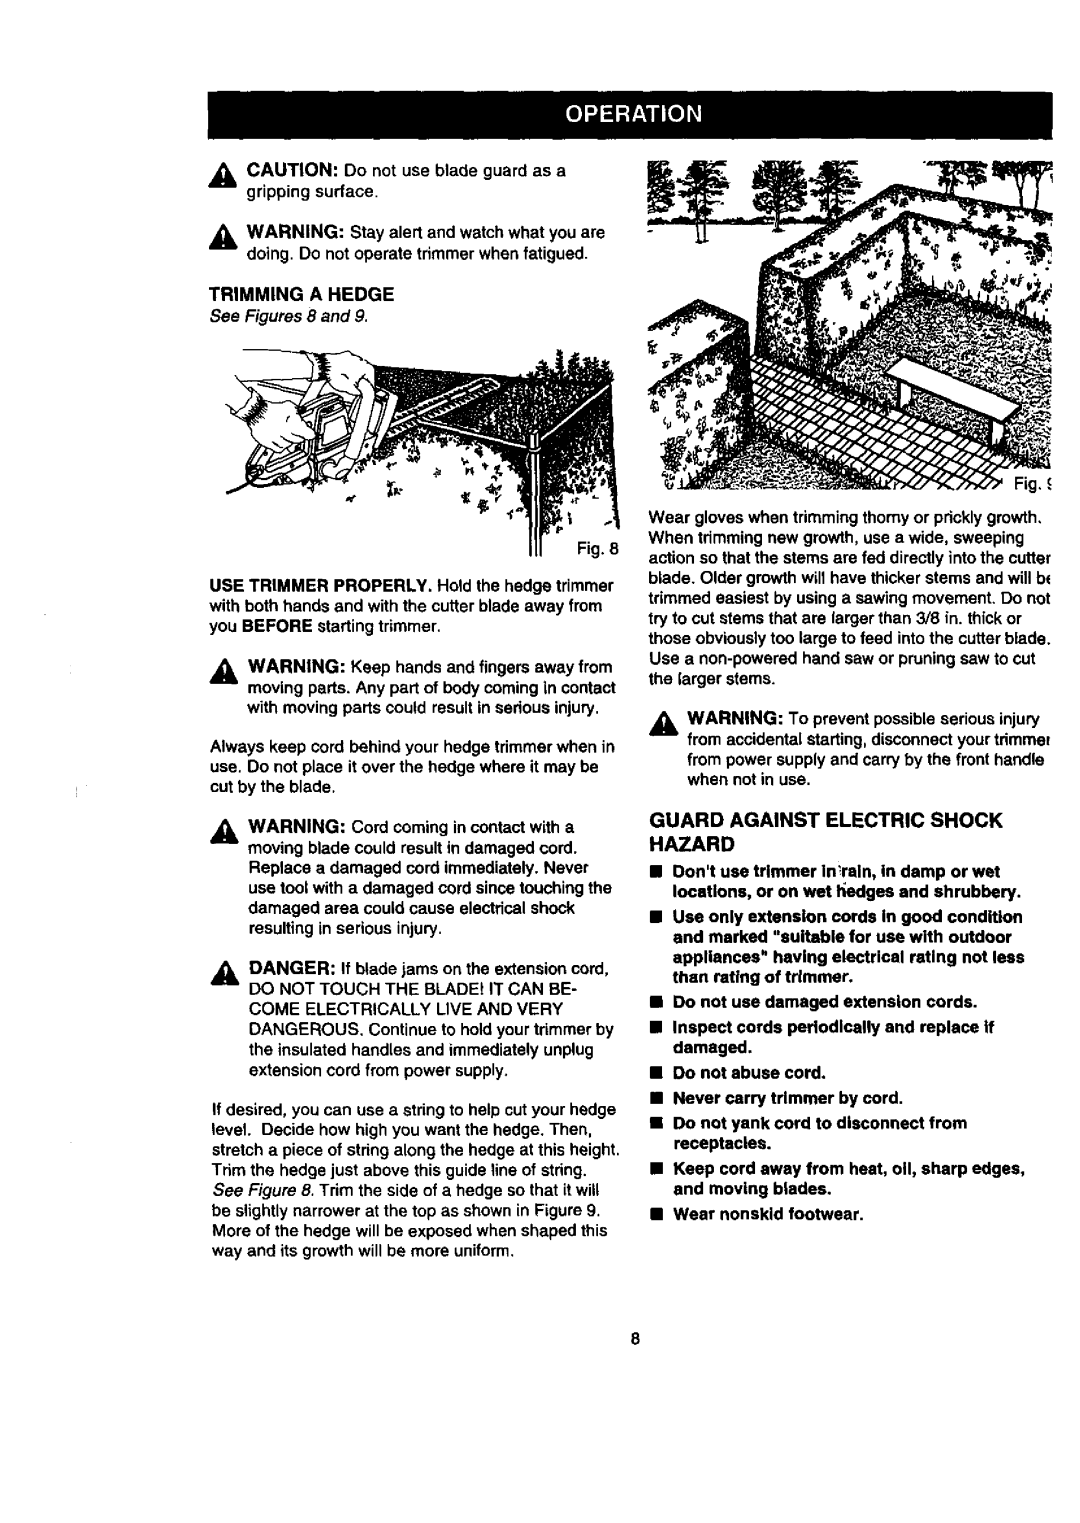 Craftsman 315.79889 owner manual Guard Against Electric Shock Hazard, See Figures 8 and 